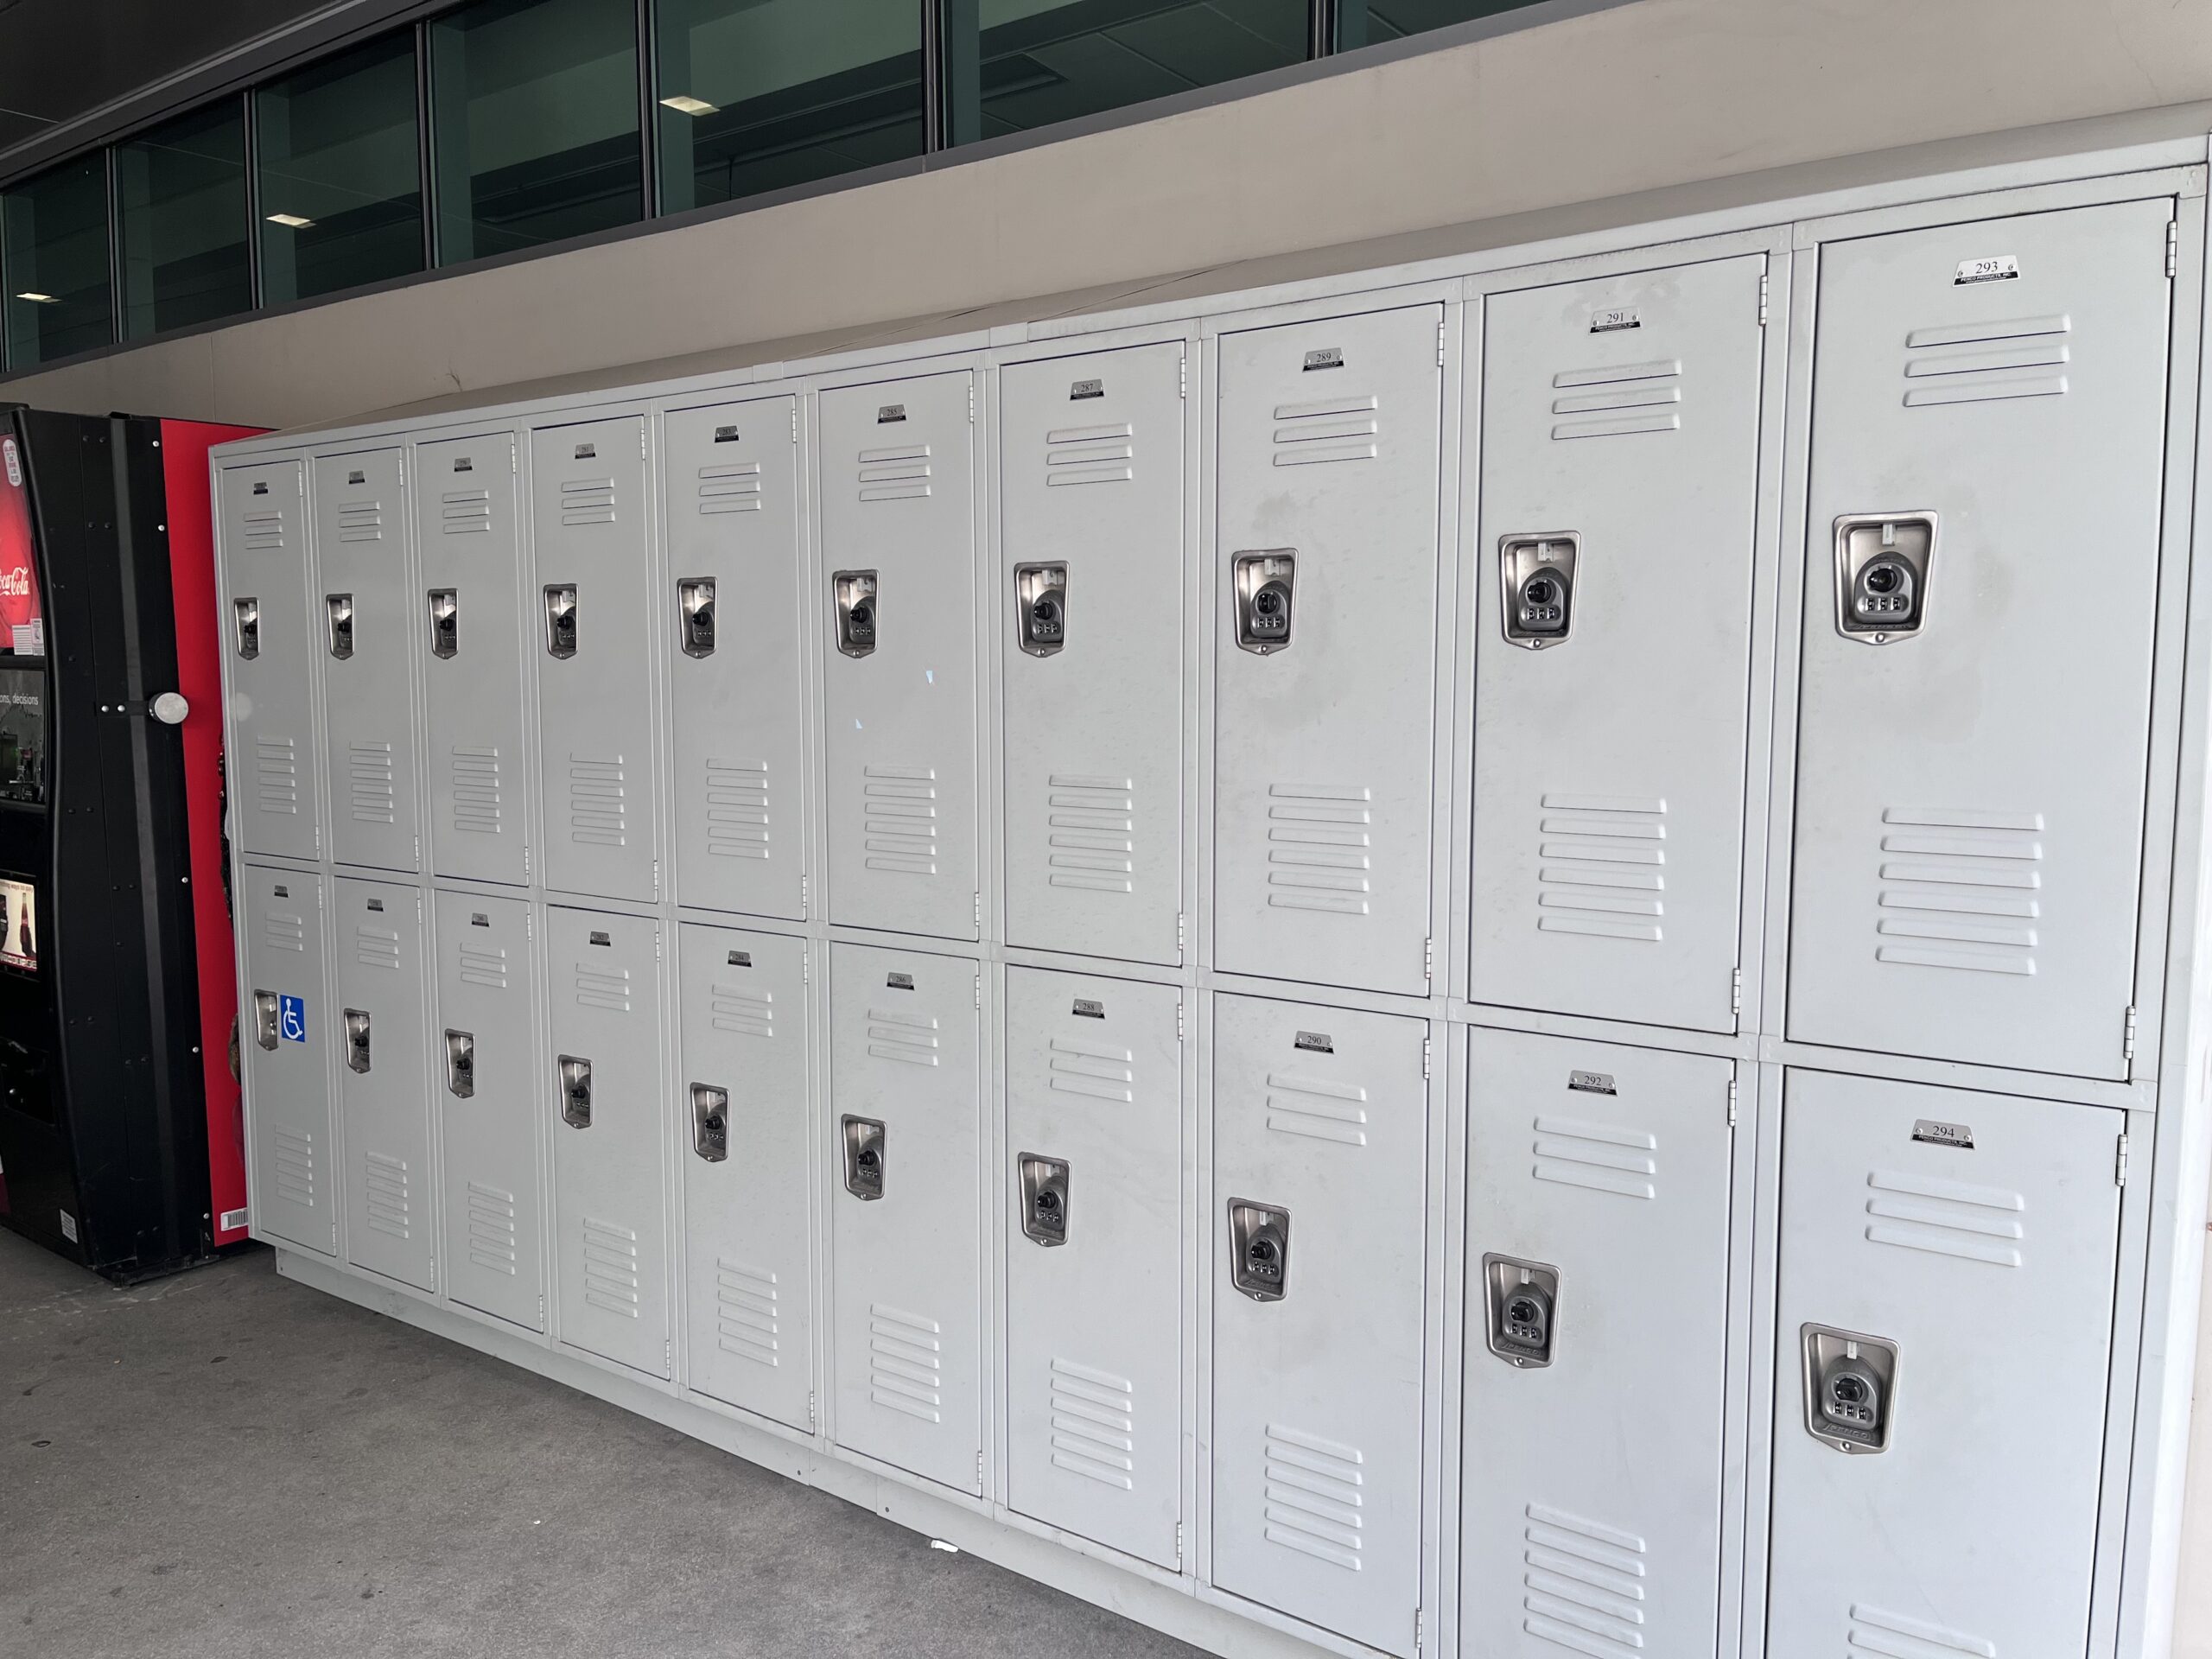 A row of lockers line the wall of a building.